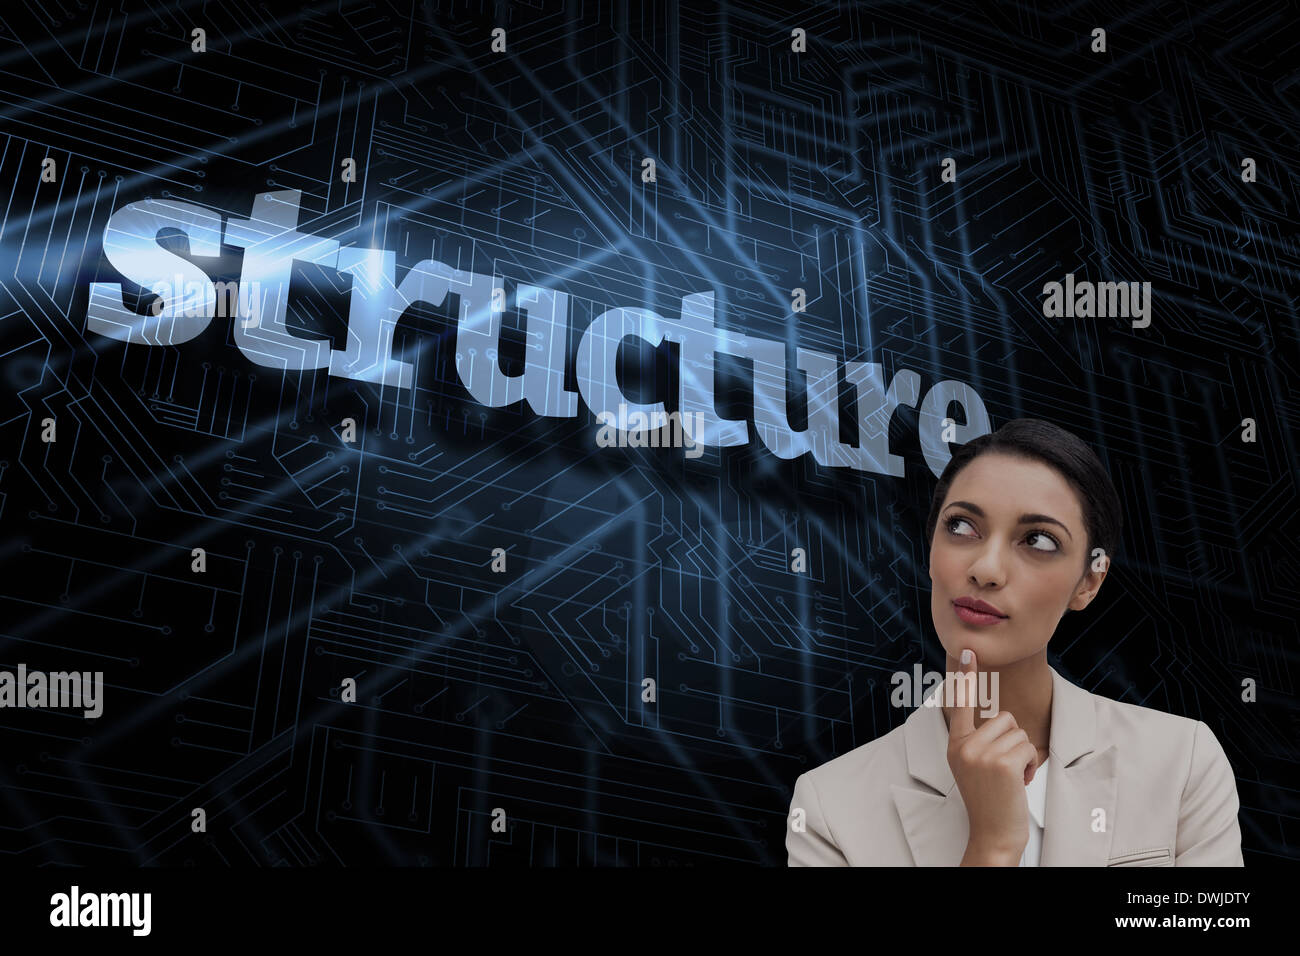 Structure against futuristic black and blue background Stock Photo